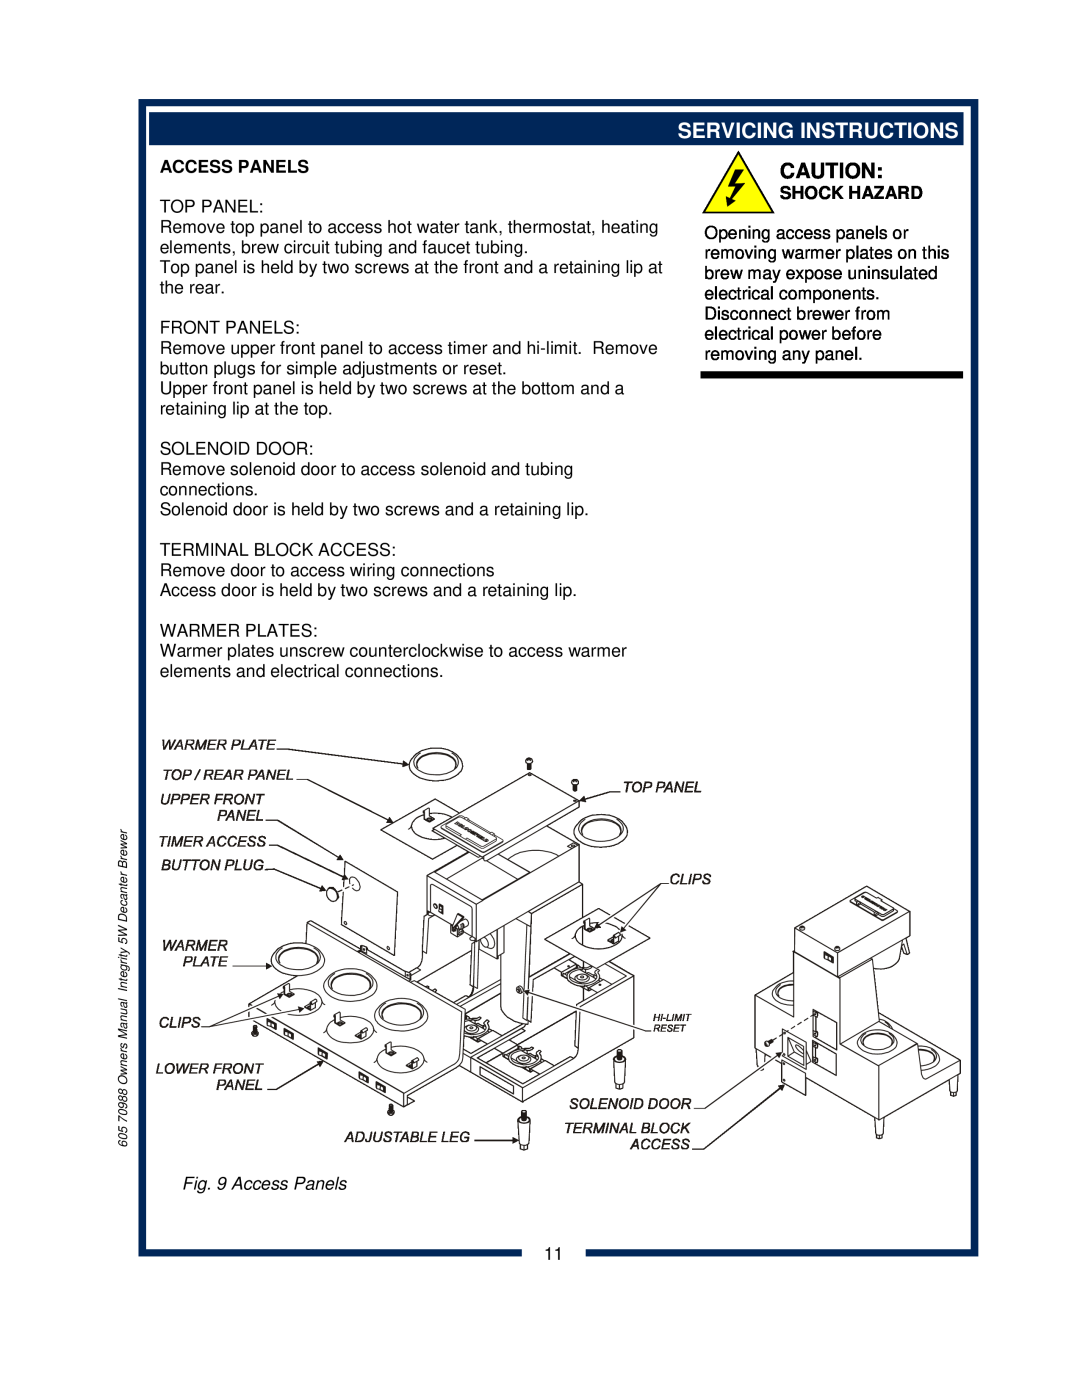 Bloomfield 8752 owner manual Servicing Instructions, Access Panels, Shock Hazard 